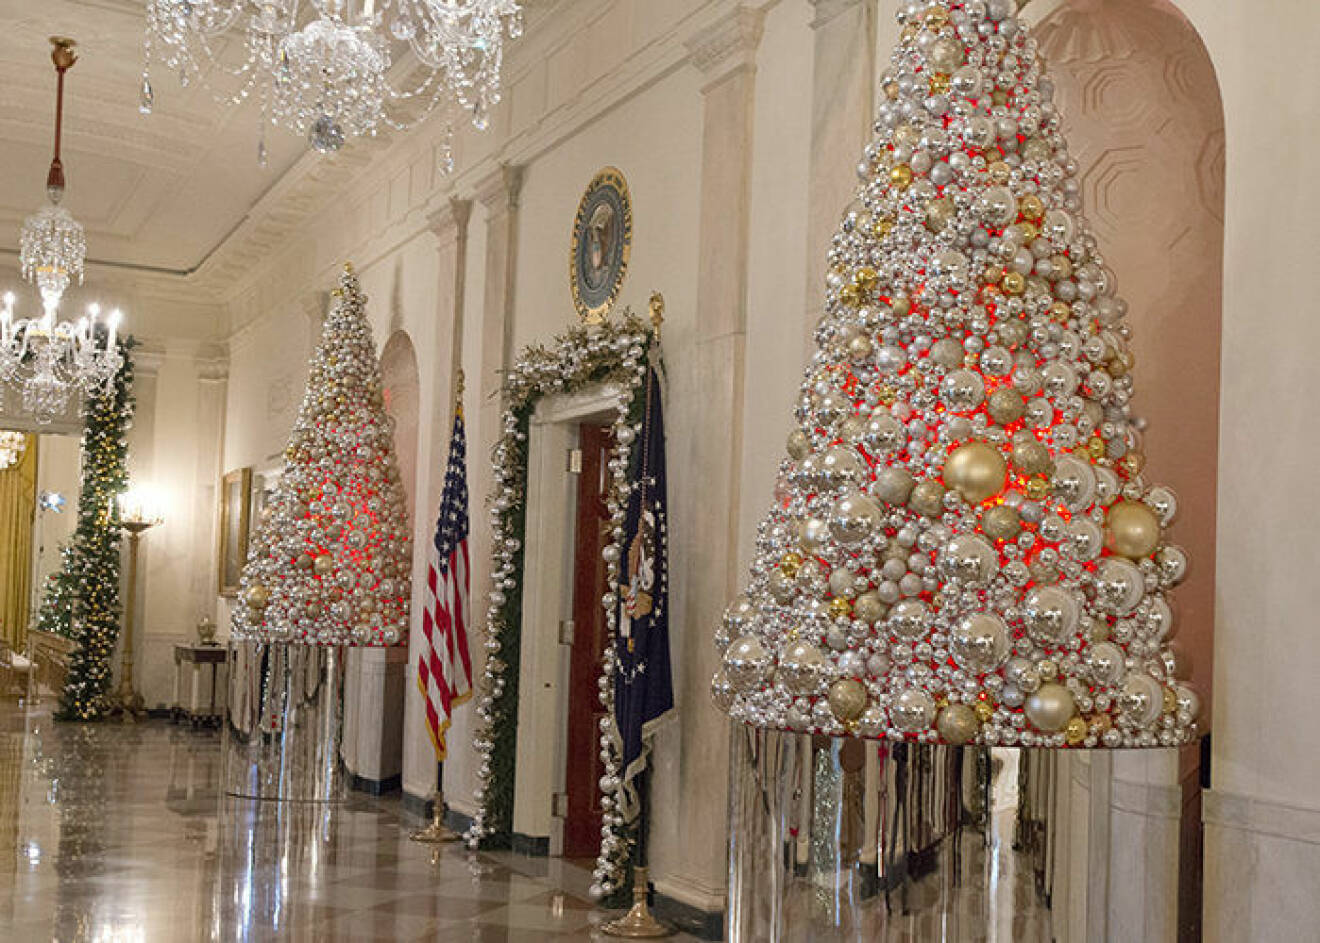 The 2016 White House Christmas decorations are previewed for the press at the White House in Washington, DC on Tuesday, November 29, 2016. Pictured are Christmas decorations in the Grand Foyer looking towards the East Room. The first lady's office released the following statement to describe those decorations, "This year∑s holiday theme, 'The Gift of the Holidays,' reflects on not only the joy of giving and receiving, but also the true gifts of life, such as service, friends and family, education, and good health, as we celebrate the holiday season." Credit: Ron Sachs / CNP - NO WIRE SERVICE - Photo: Ron Sachs/Consolidated/dpa (c) DPA / IBL BildbyrÂ